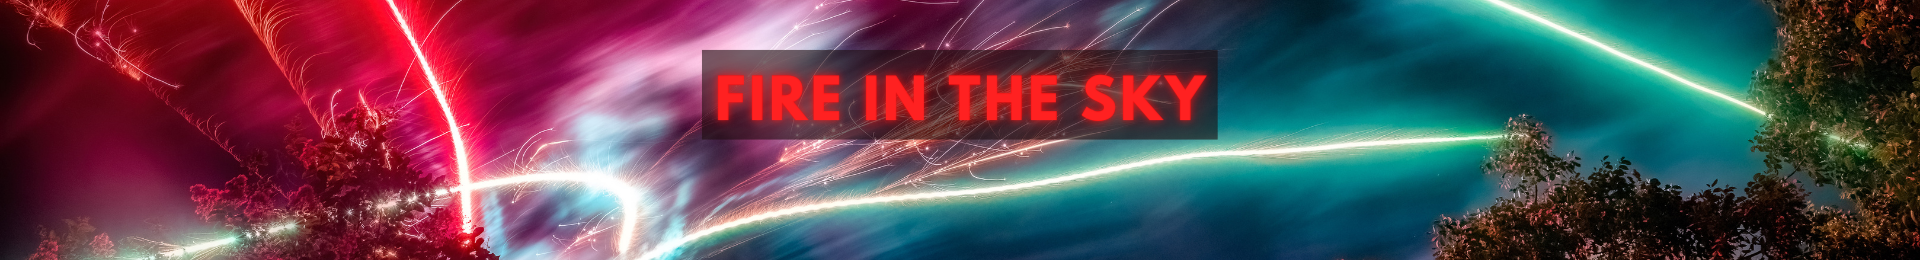 Fire In The Sky banner